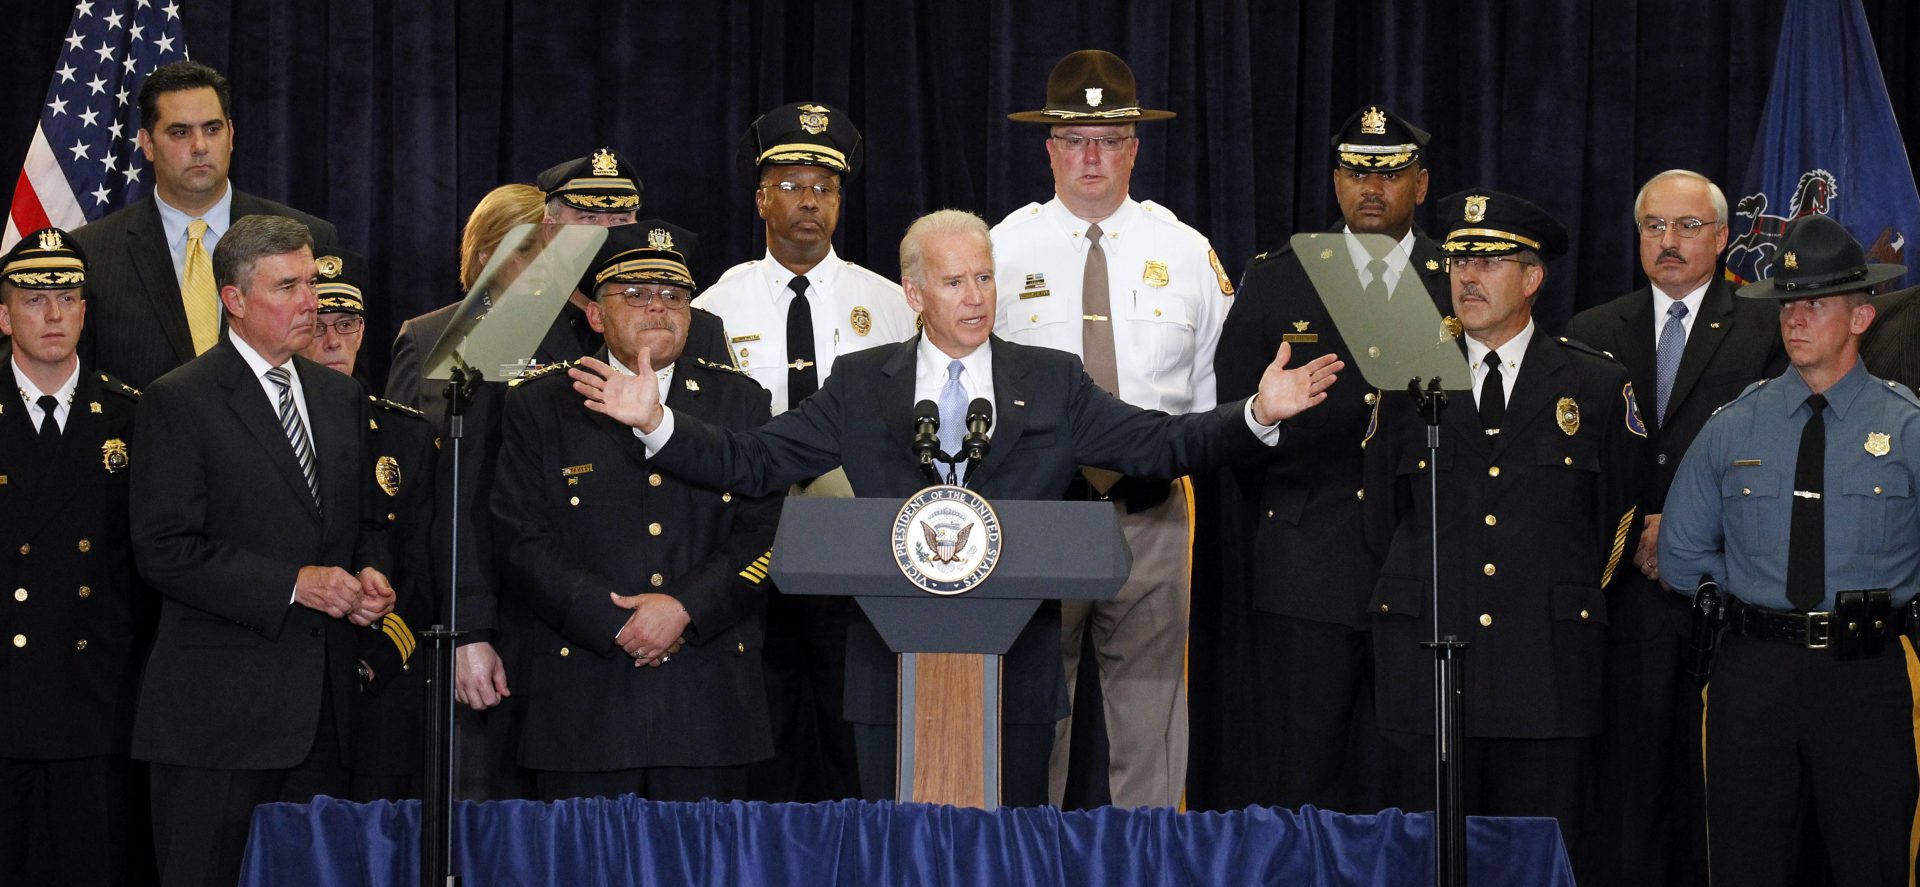 FILE PHOTO: Vice President Joe Biden, center, with members of law enforcement, speaks during a media availability after their roundtable to discuss the impact of budget cuts on their ability to effectively police their communities Tuesday, Oct. 18, 2011, in Philadelphia.